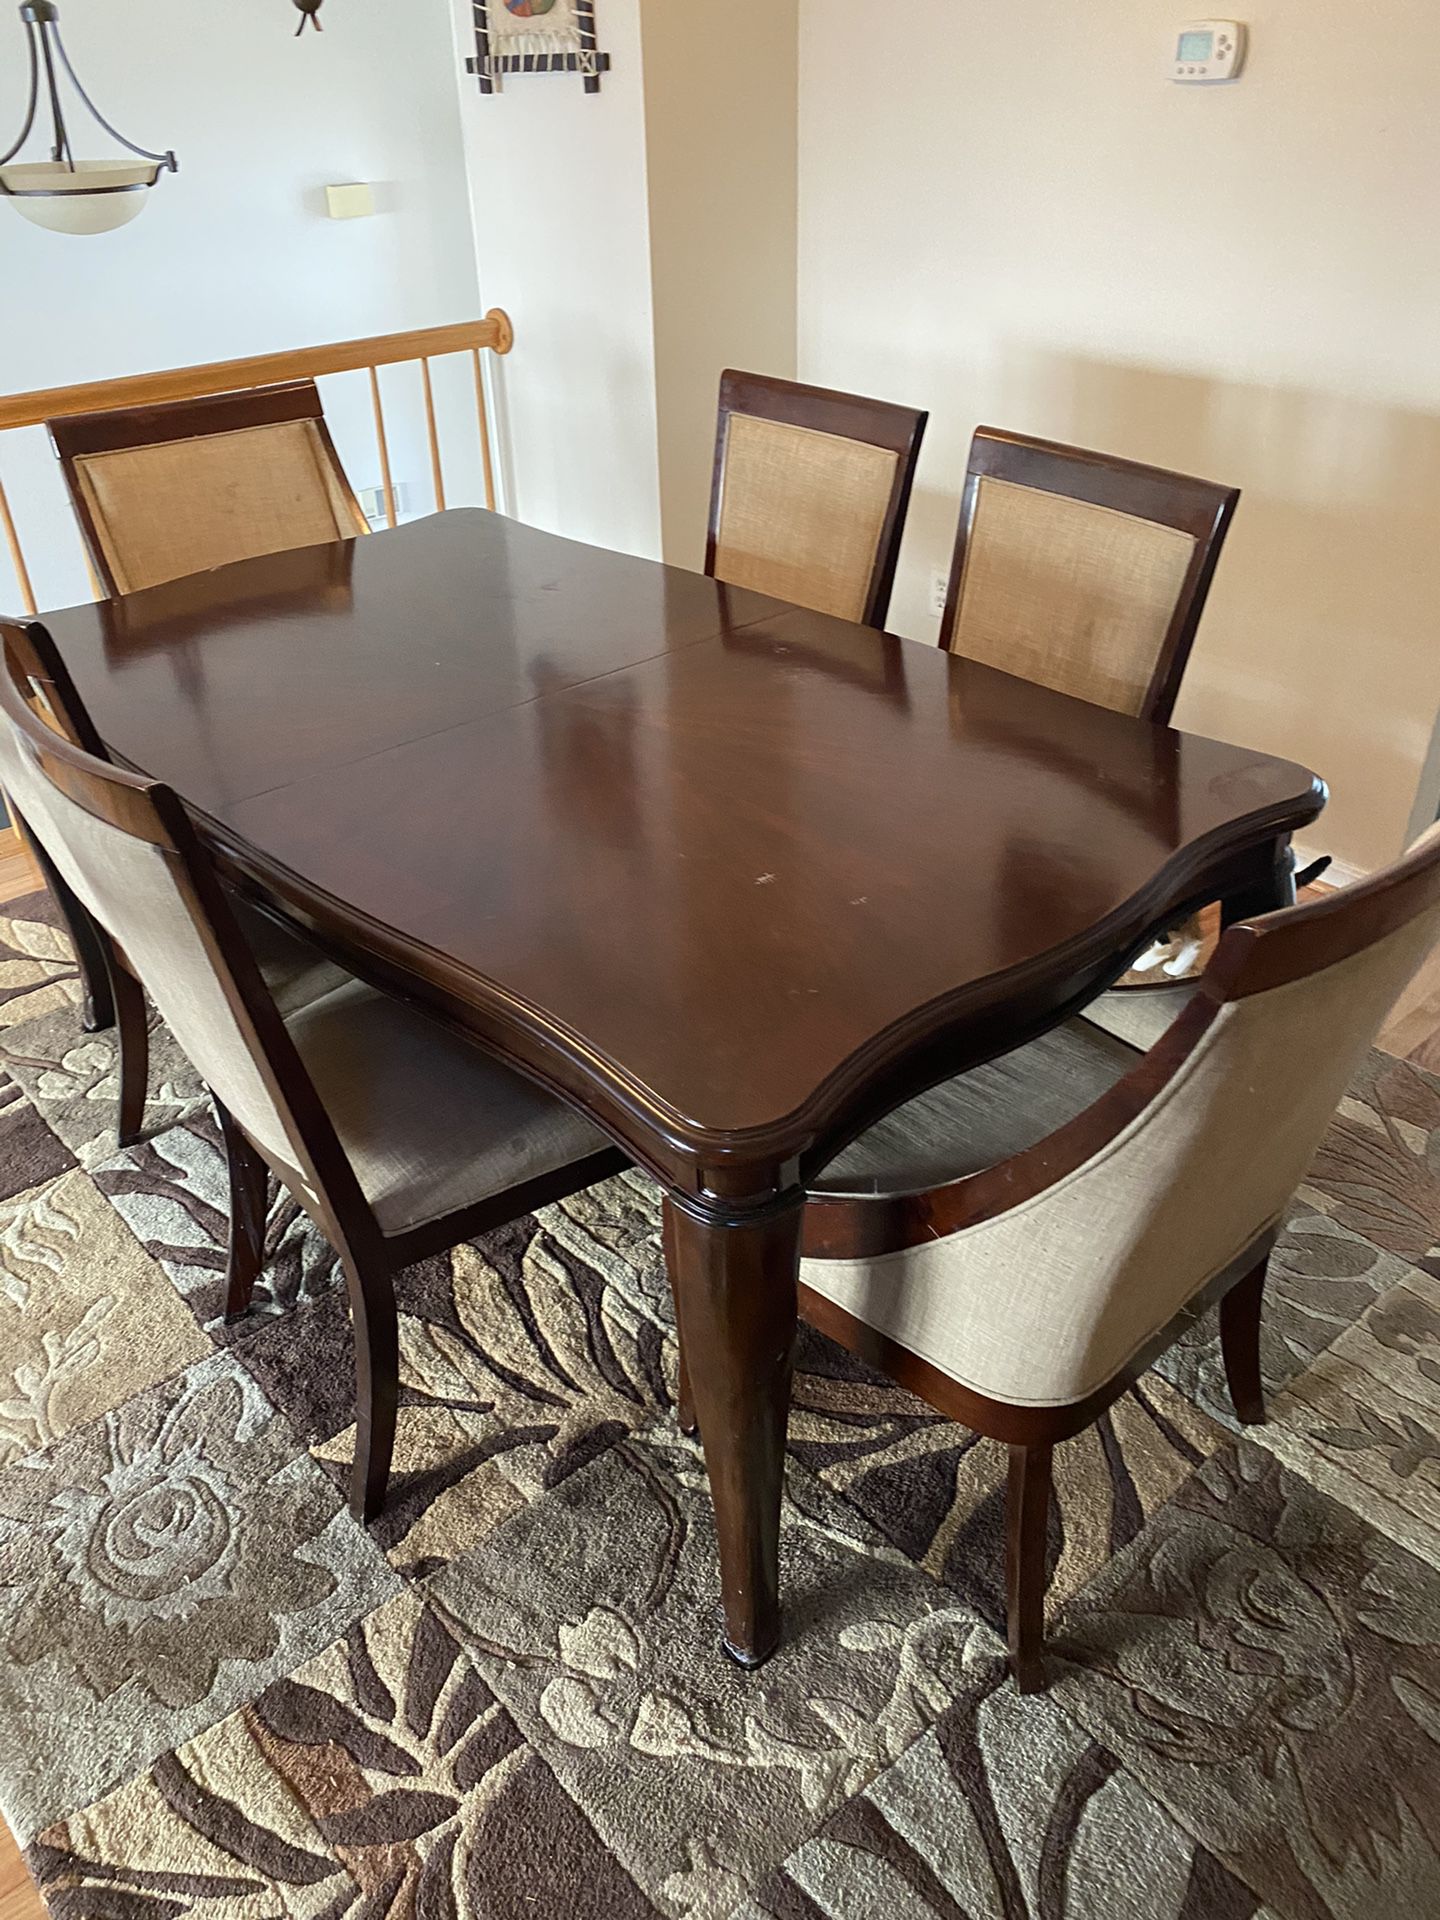 Dining set with 6 chairs for Free